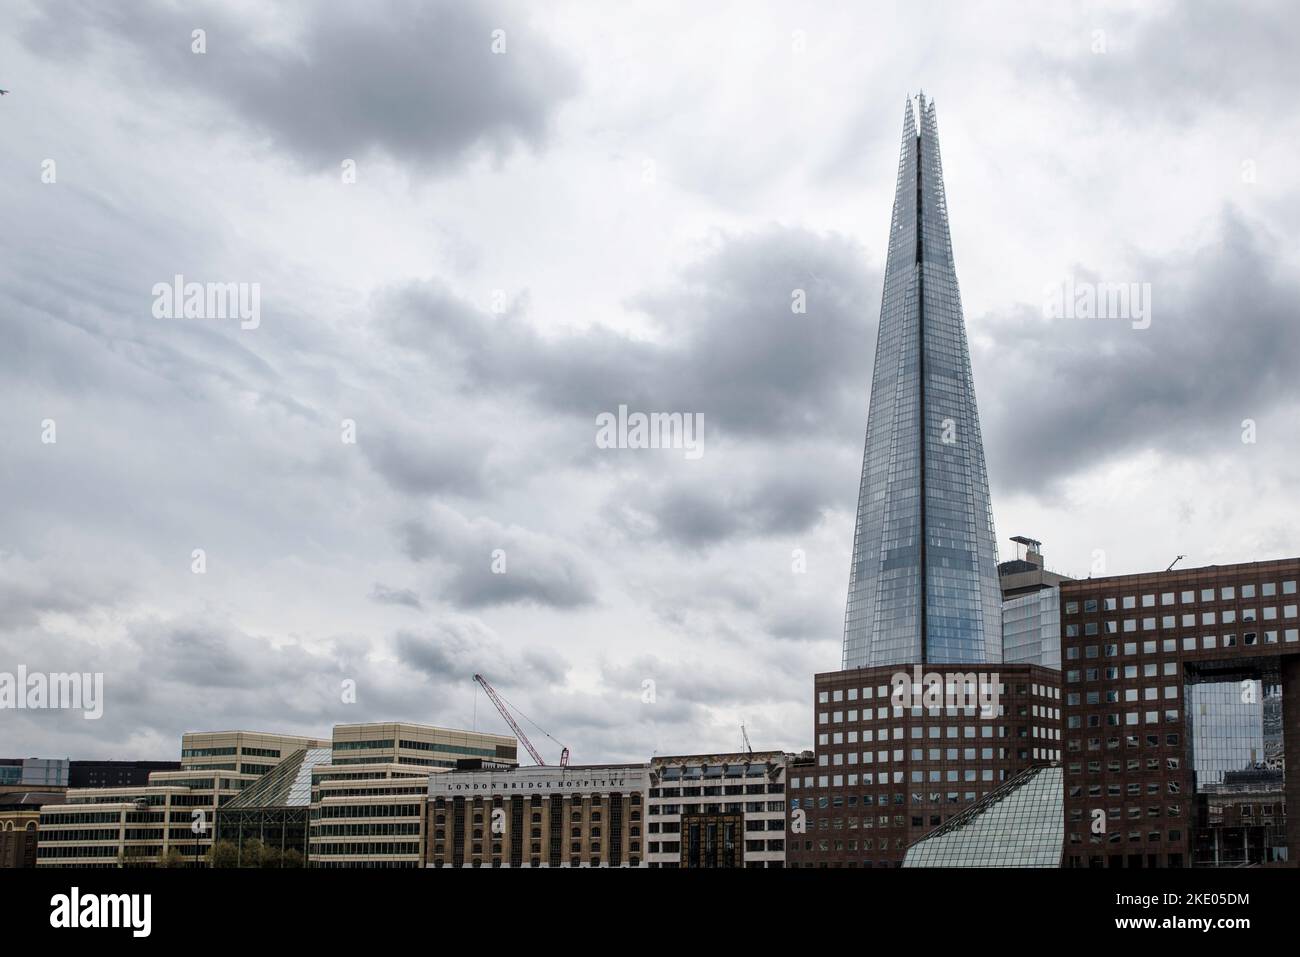 A scenic shot of the gloomy London skyline featuring The Shard in ...